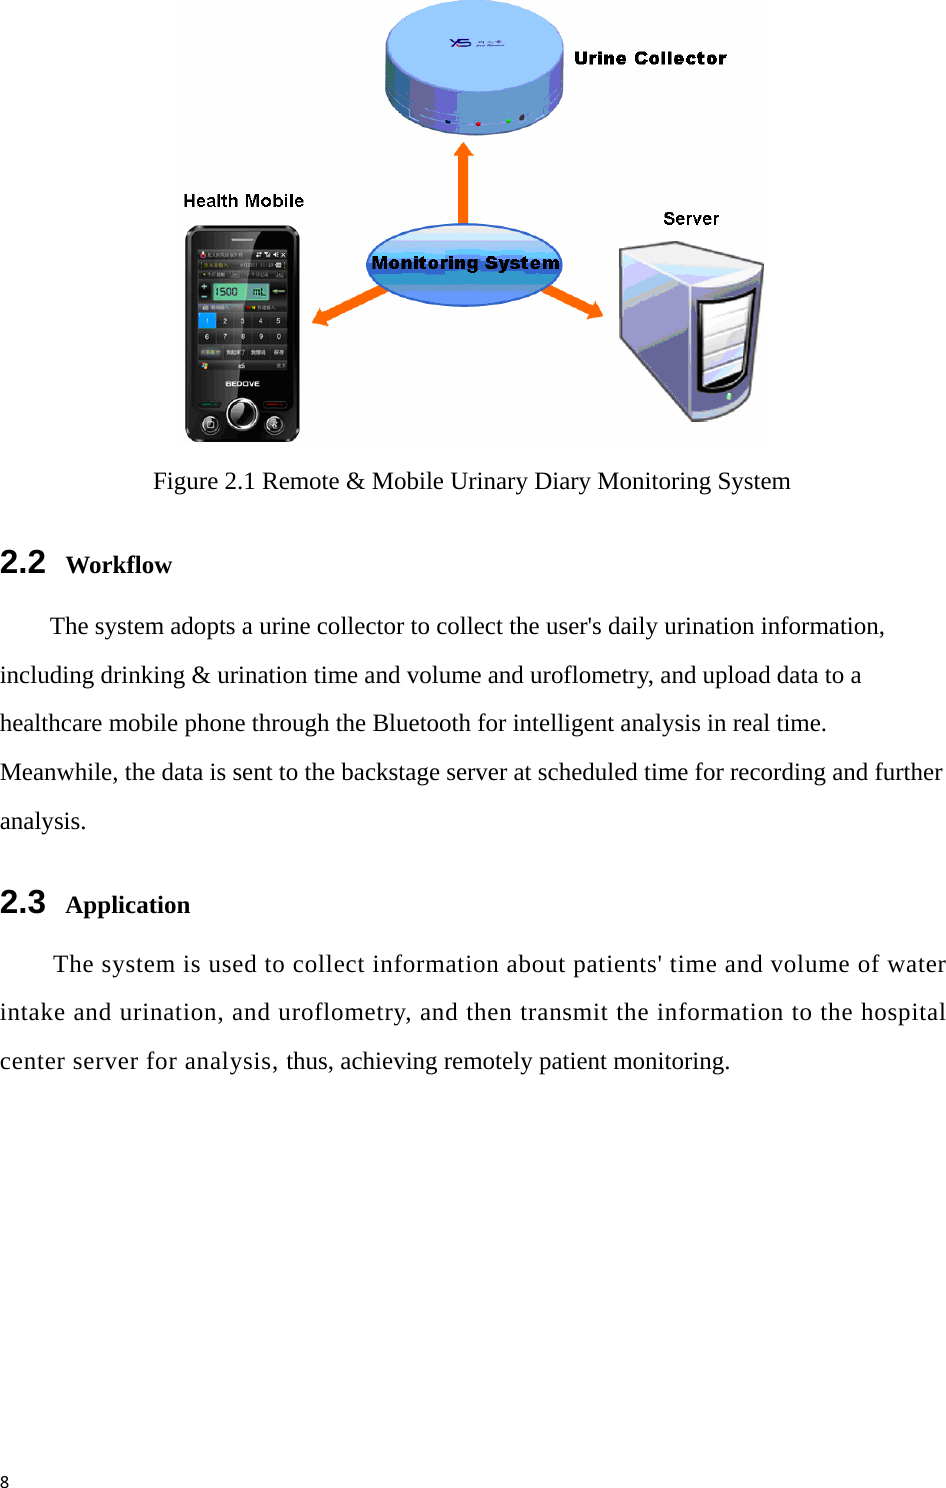 8 Figure 2.1 Remote &amp; Mobile Urinary Diary Monitoring System 2.2  Workflow The system adopts a urine collector to collect the user&apos;s daily urination information, including drinking &amp; urination time and volume and uroflometry, and upload data to a healthcare mobile phone through the Bluetooth for intelligent analysis in real time. Meanwhile, the data is sent to the backstage server at scheduled time for recording and further analysis. 2.3  Application The system is used to collect information about patients&apos; time and volume of water intake and urination, and uroflometry, and then transmit the information to the hospital center server for analysis, thus, achieving remotely patient monitoring. 